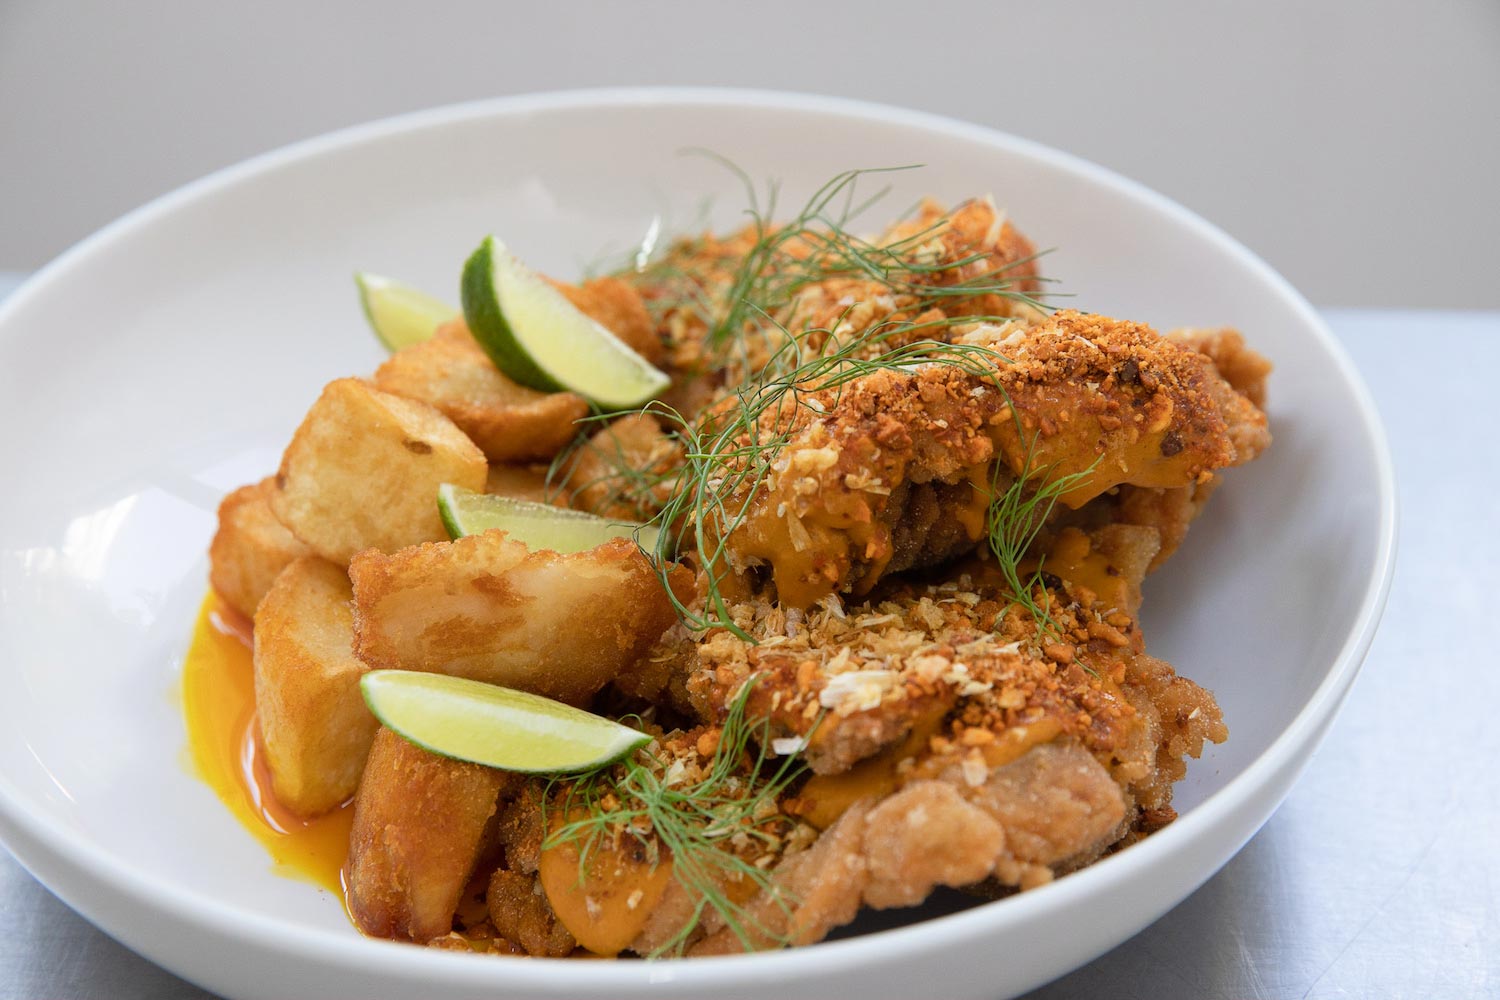 Bonbite family style main dish fried chicken and potatoes with crispy garlic and lime